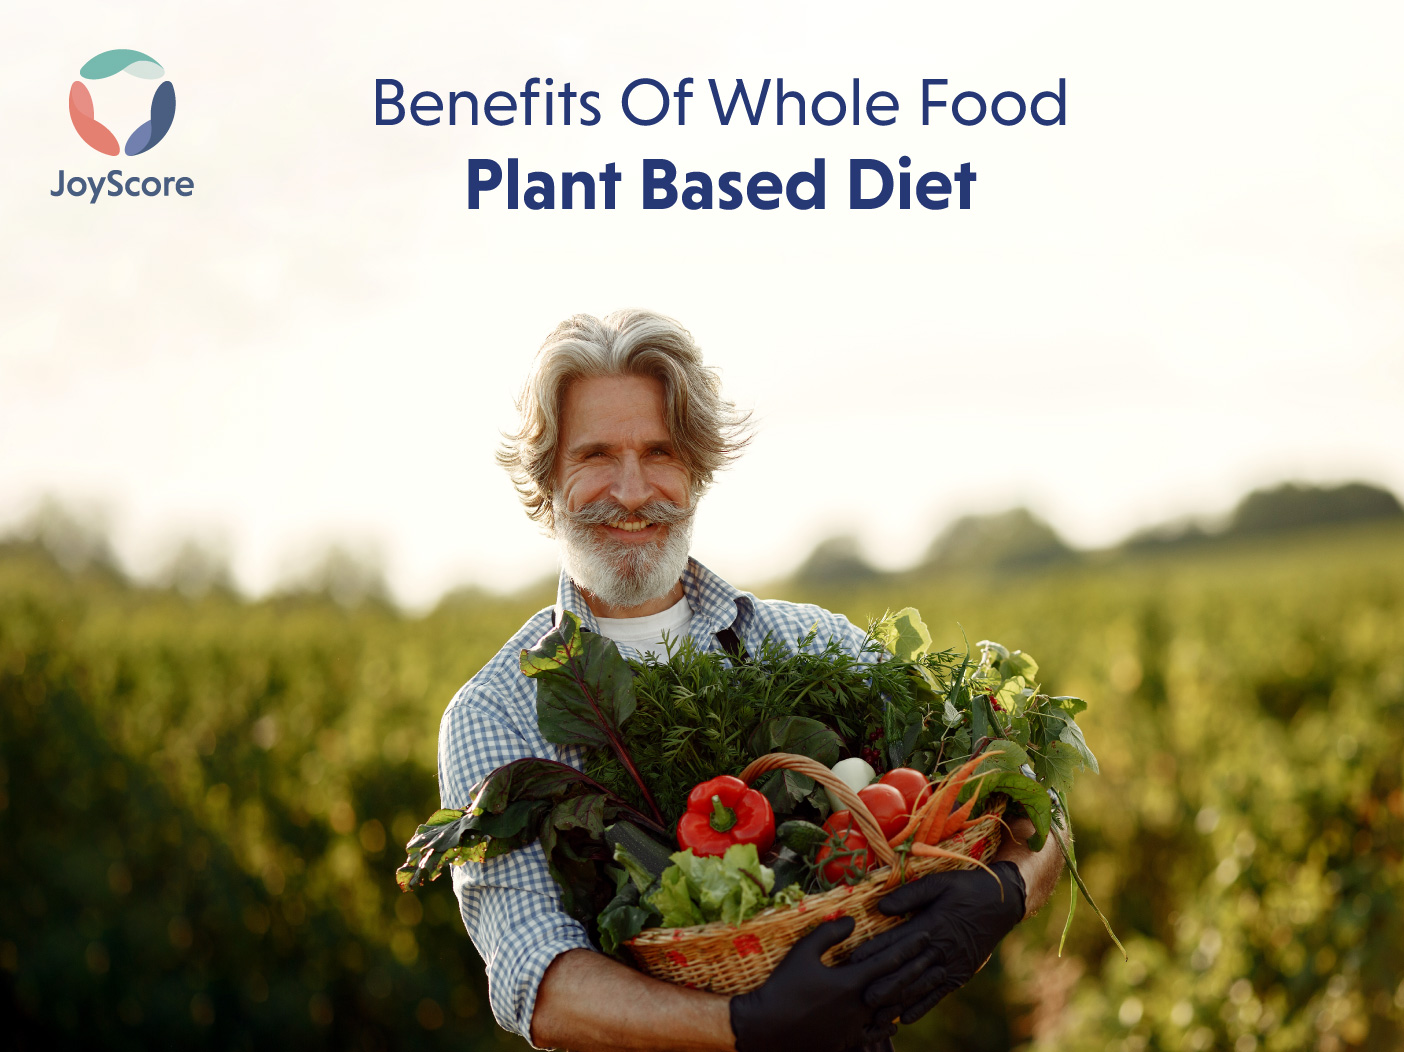 Benefits of Whole Food Plant-Based Diet